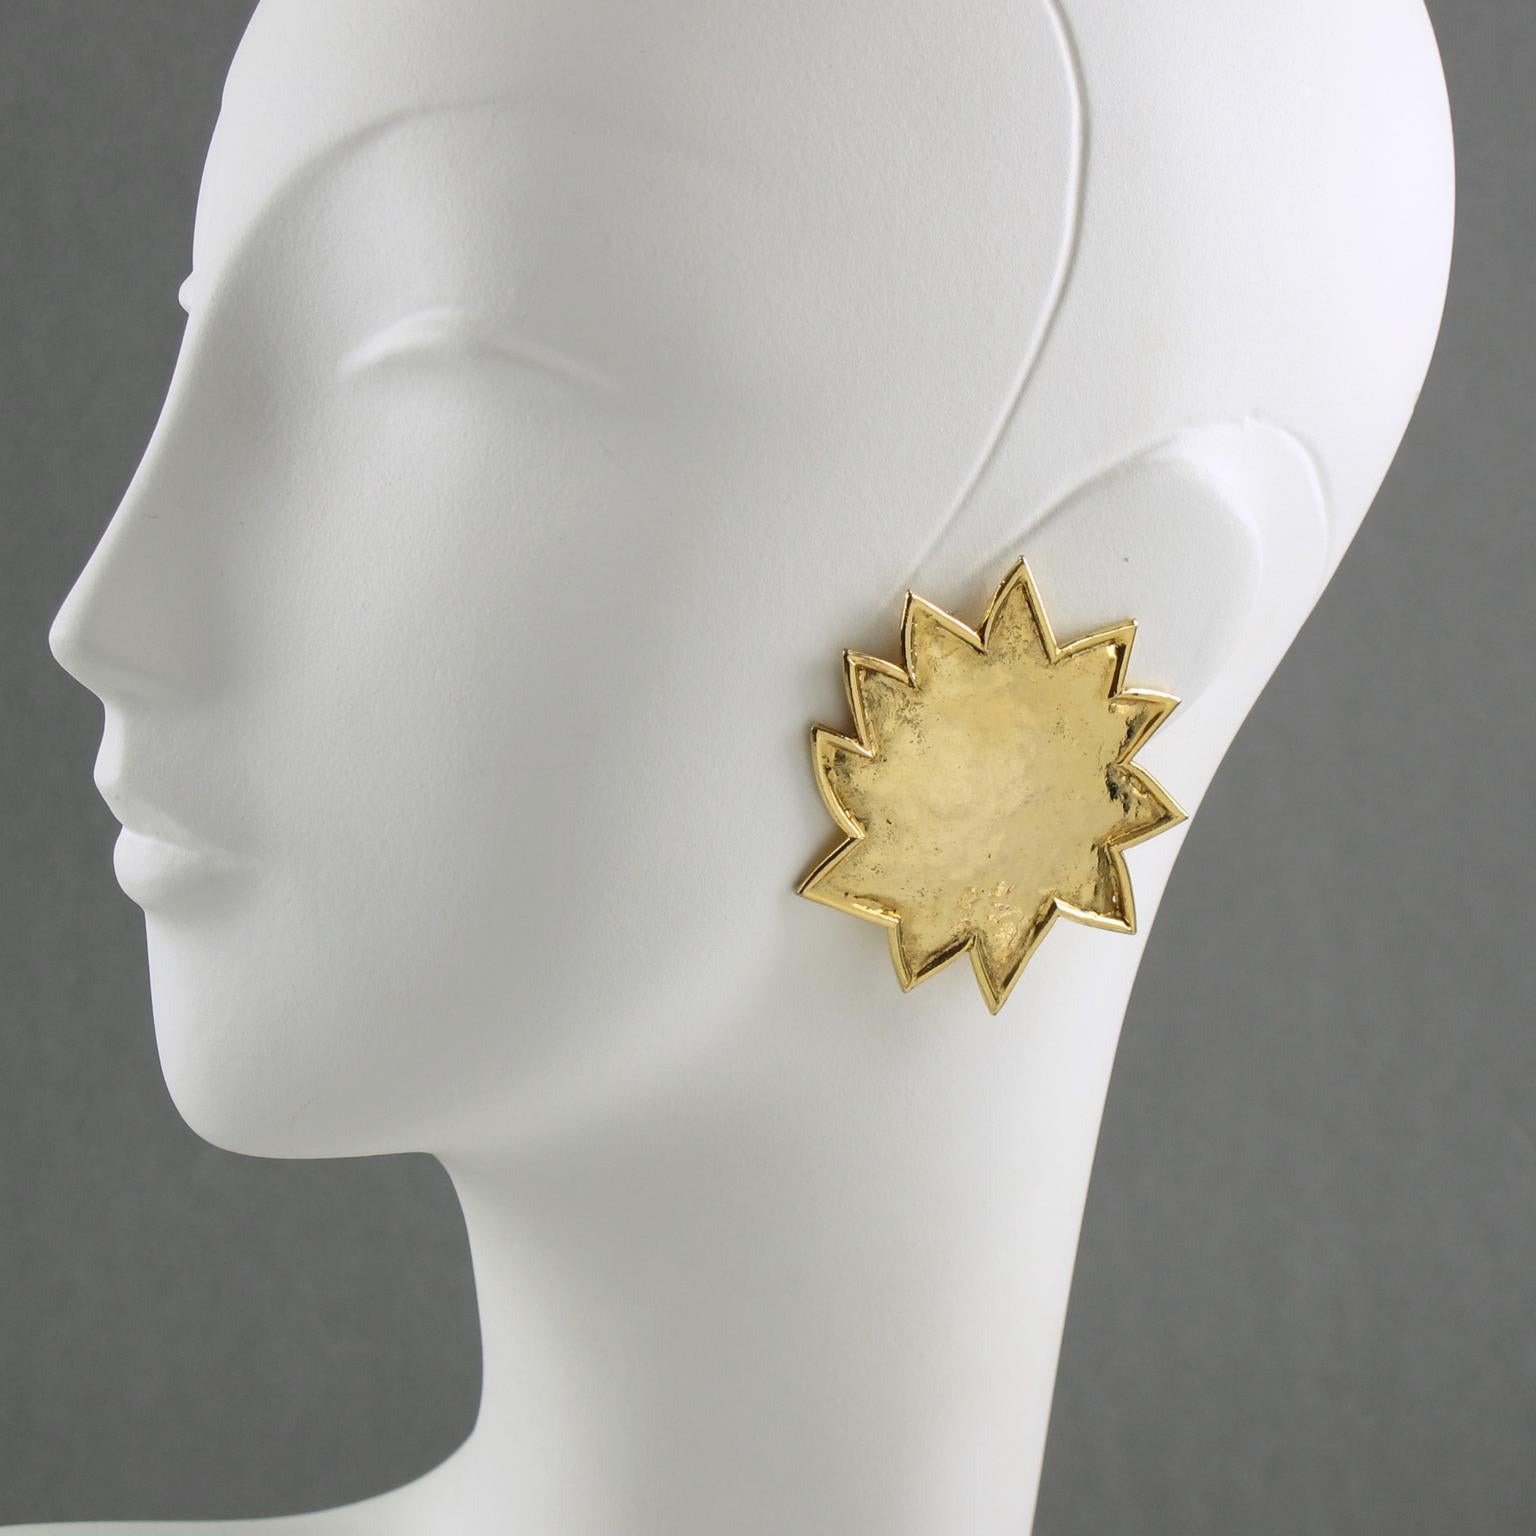 Elegant Edouard Rambaud Paris clip-on Earrings. Oversized dimensional carved sun with asymmetric shape in gilt metal all textured with a hand-made feel and shiny finish aspect. Signed at the back by this well-known French Designer. 
Measurements: